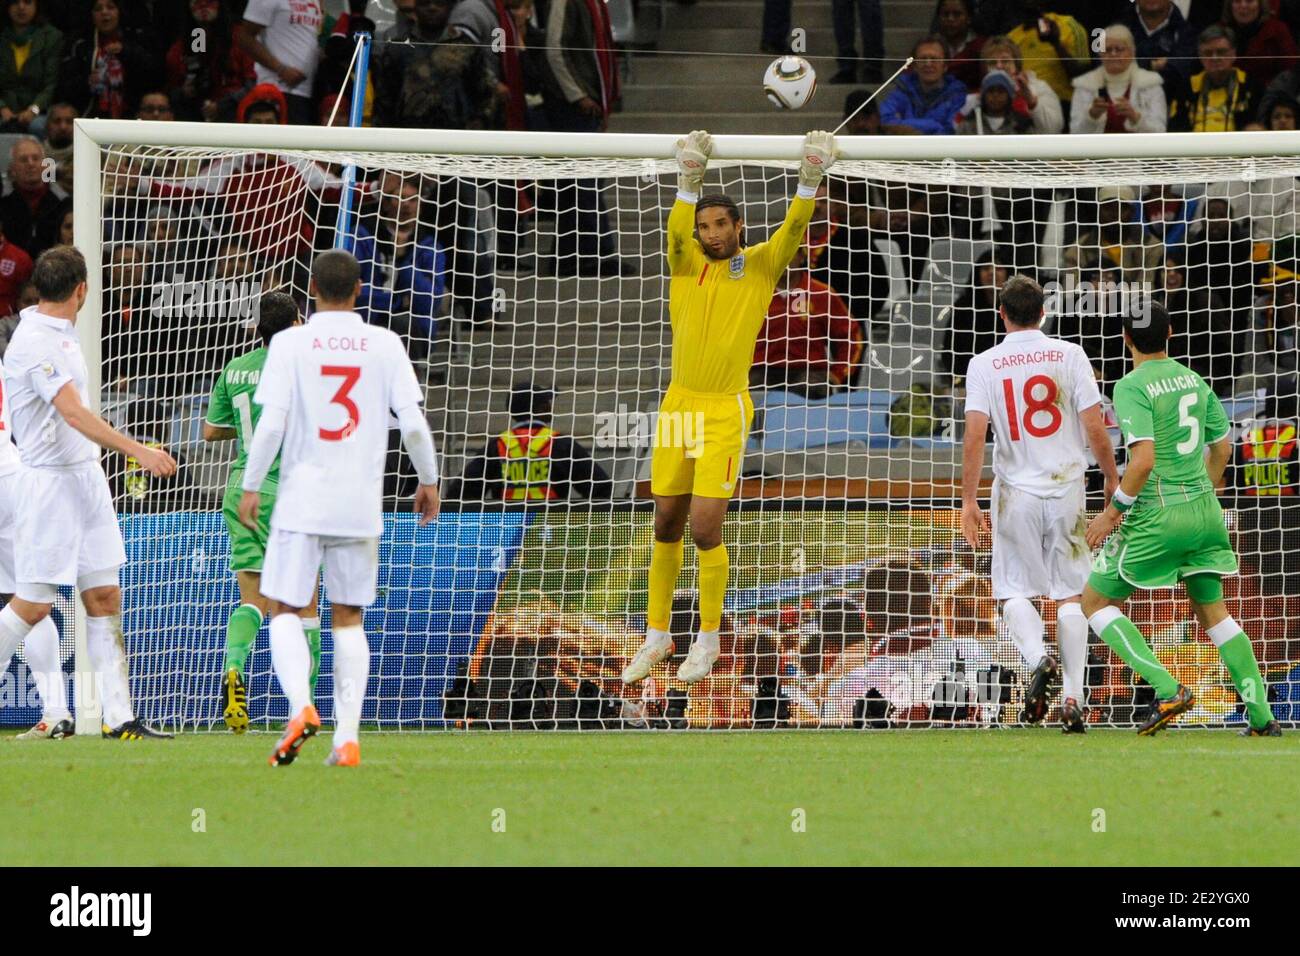 England's goalkeeper David James during the 2010 FIFA World Cup South Africa soccer match, Group C, England vs Algeria at Green Point football stadium in Capetown, South Africa on June 18, 2010. The match ended in a 0-0 draw. Photo by Henri Szwarc/ABACAPRESS.COM Stock Photo